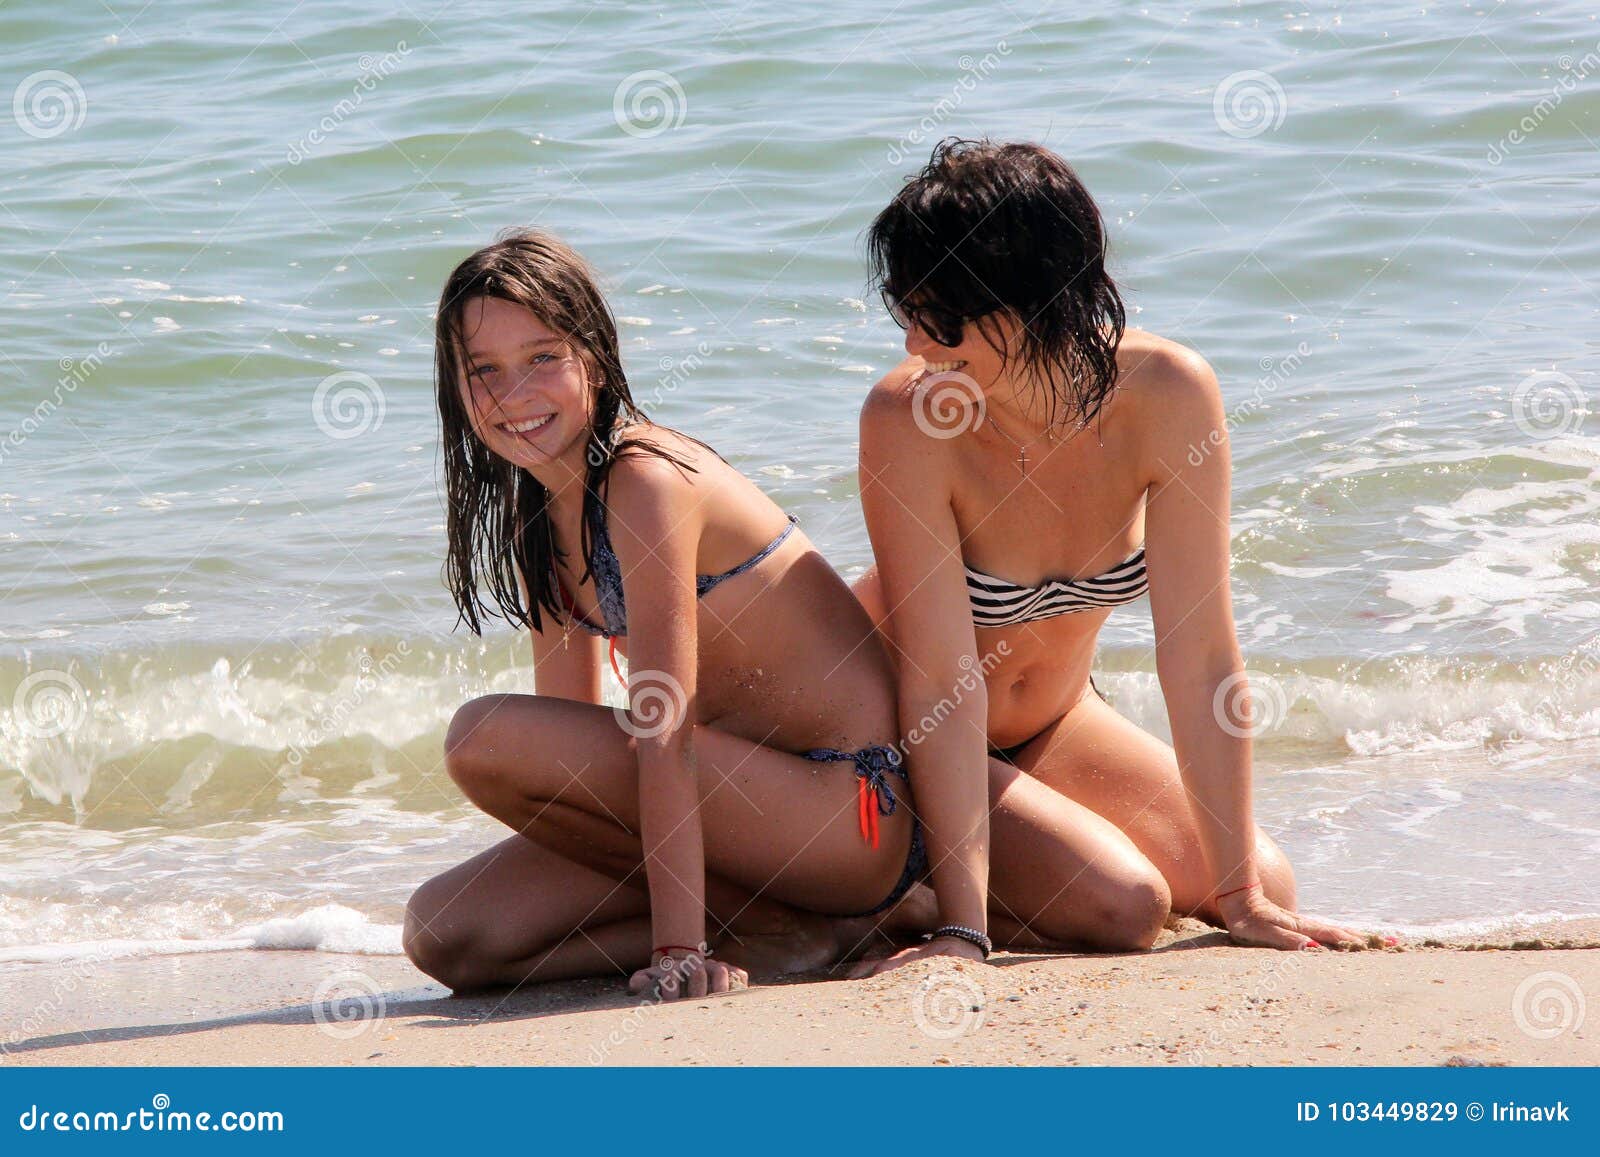 Mother and daughter on nude beach